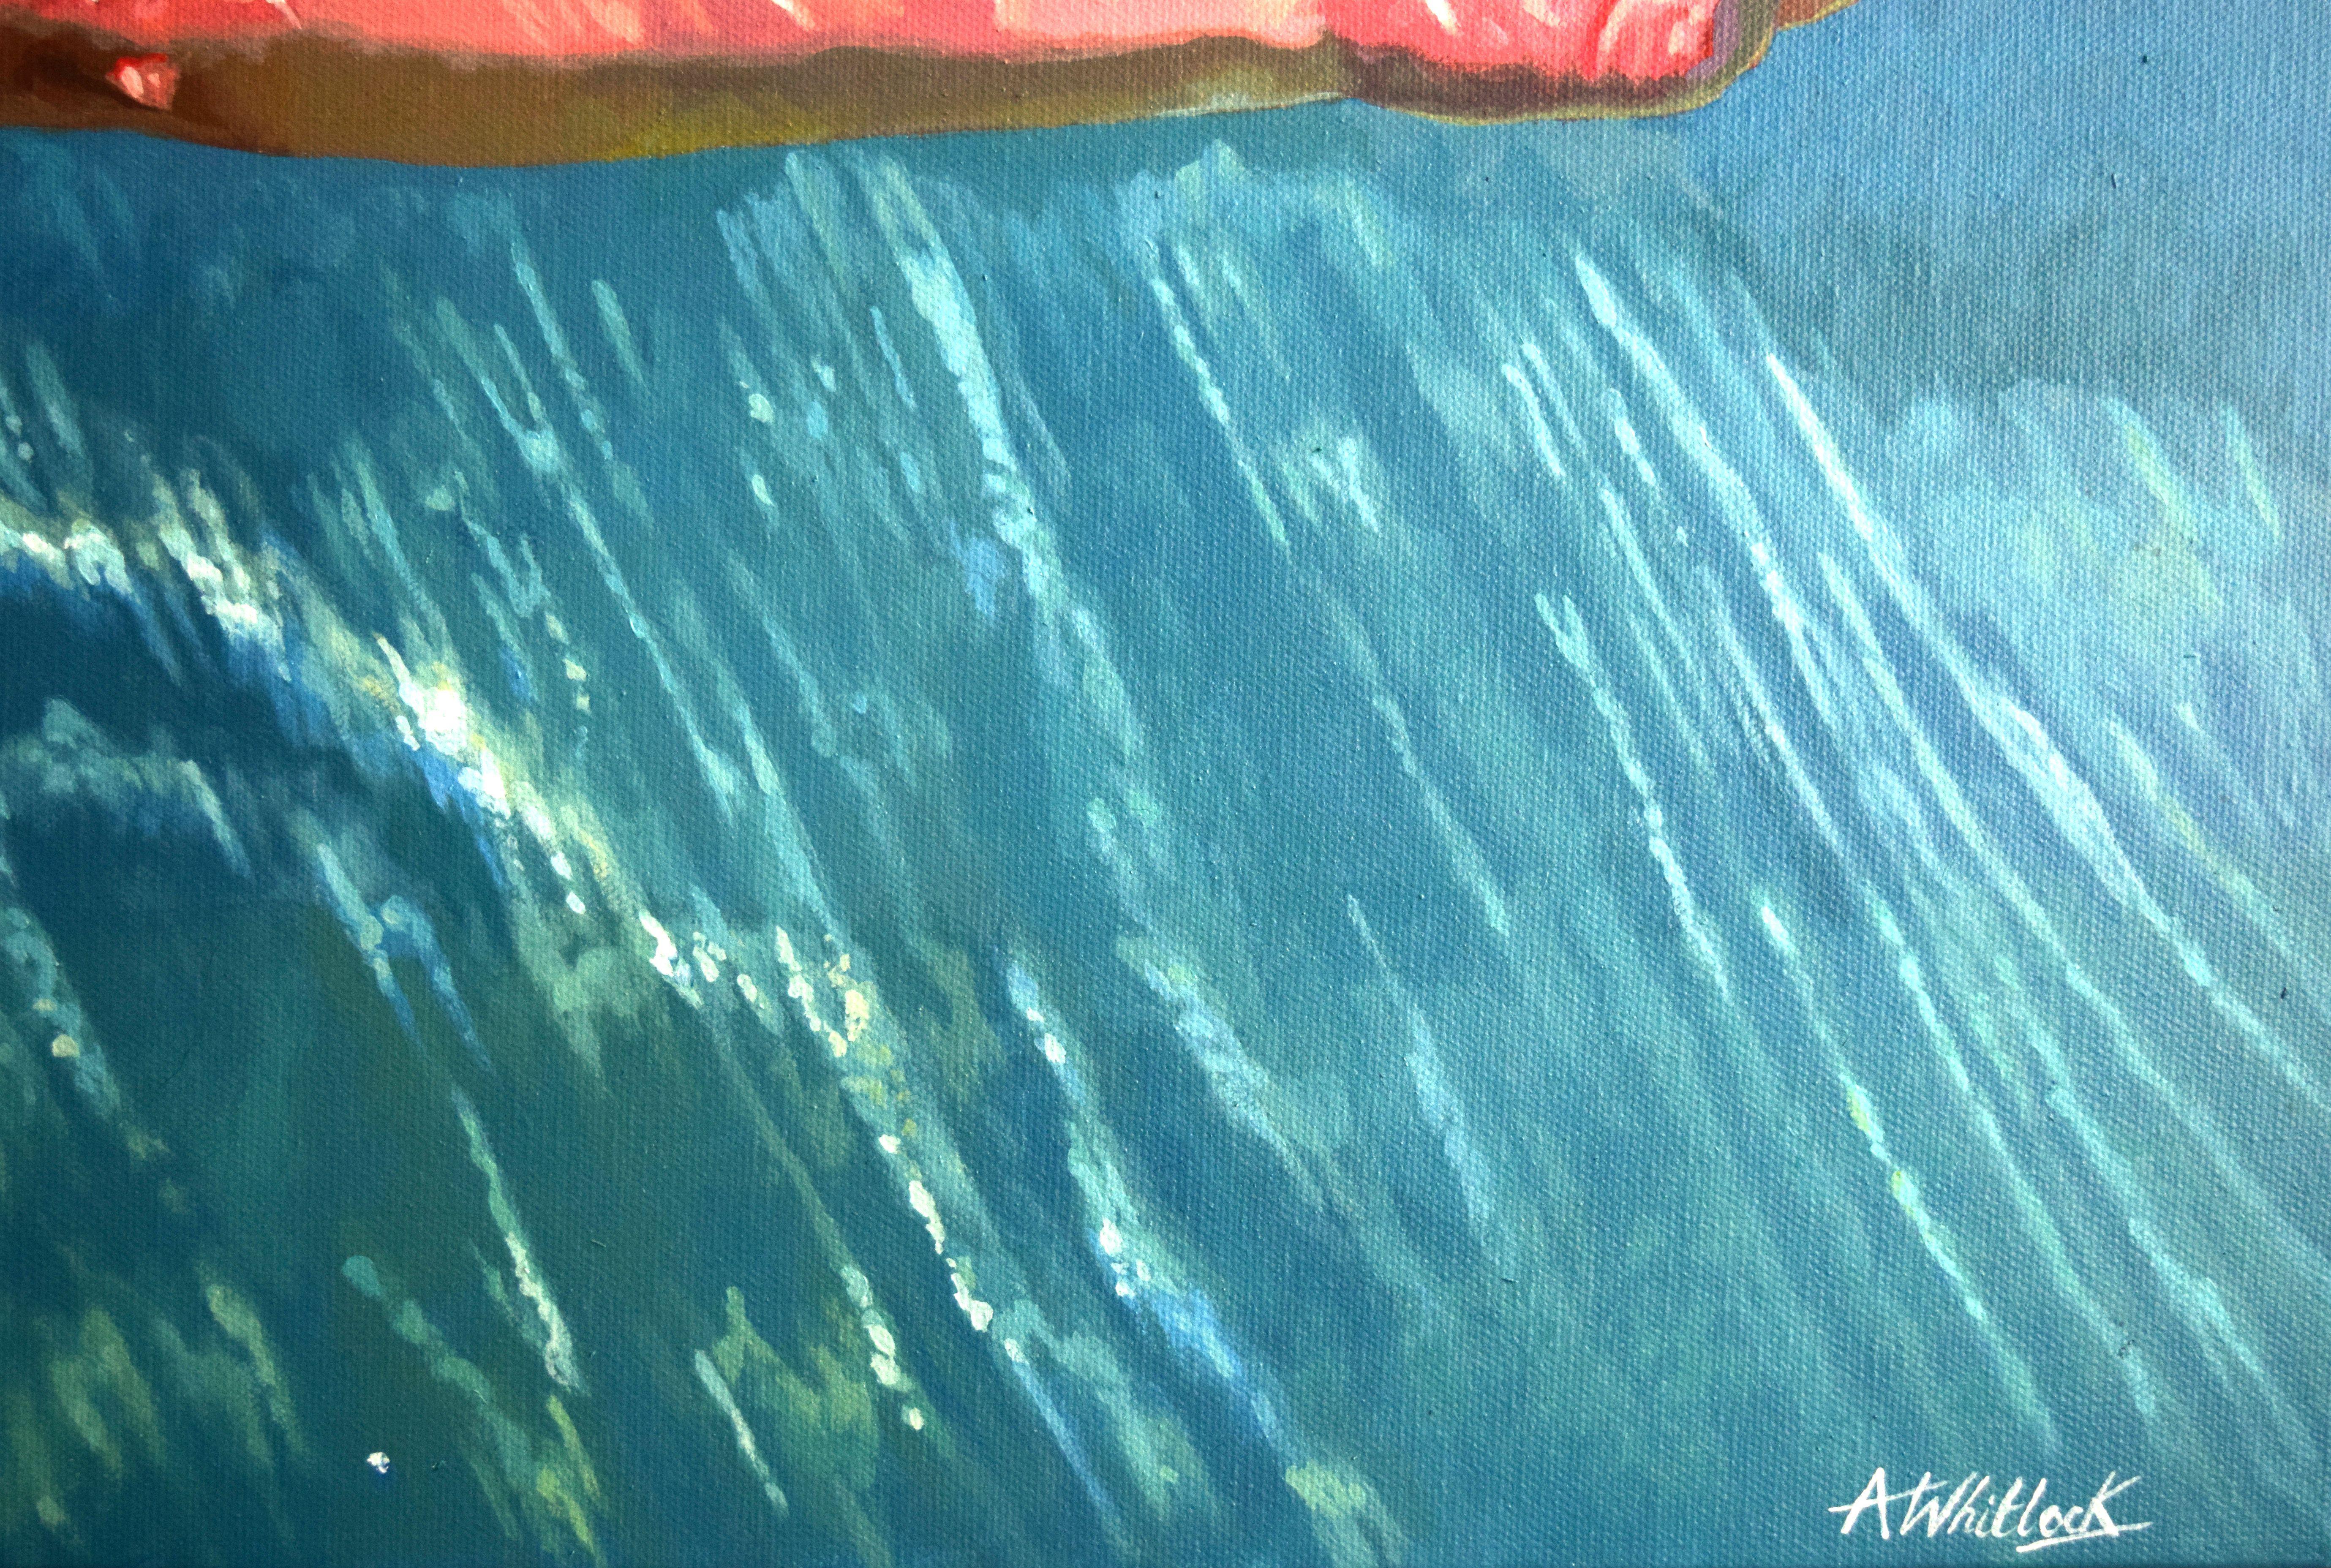 Sunlight streams down from above the water's surface. Below, in the cool depths, the swimmer is skin is illuminated by the blazing light.    This work is painted on a gallery wrapped canvas. The painting continues around the edge and, therefore, it